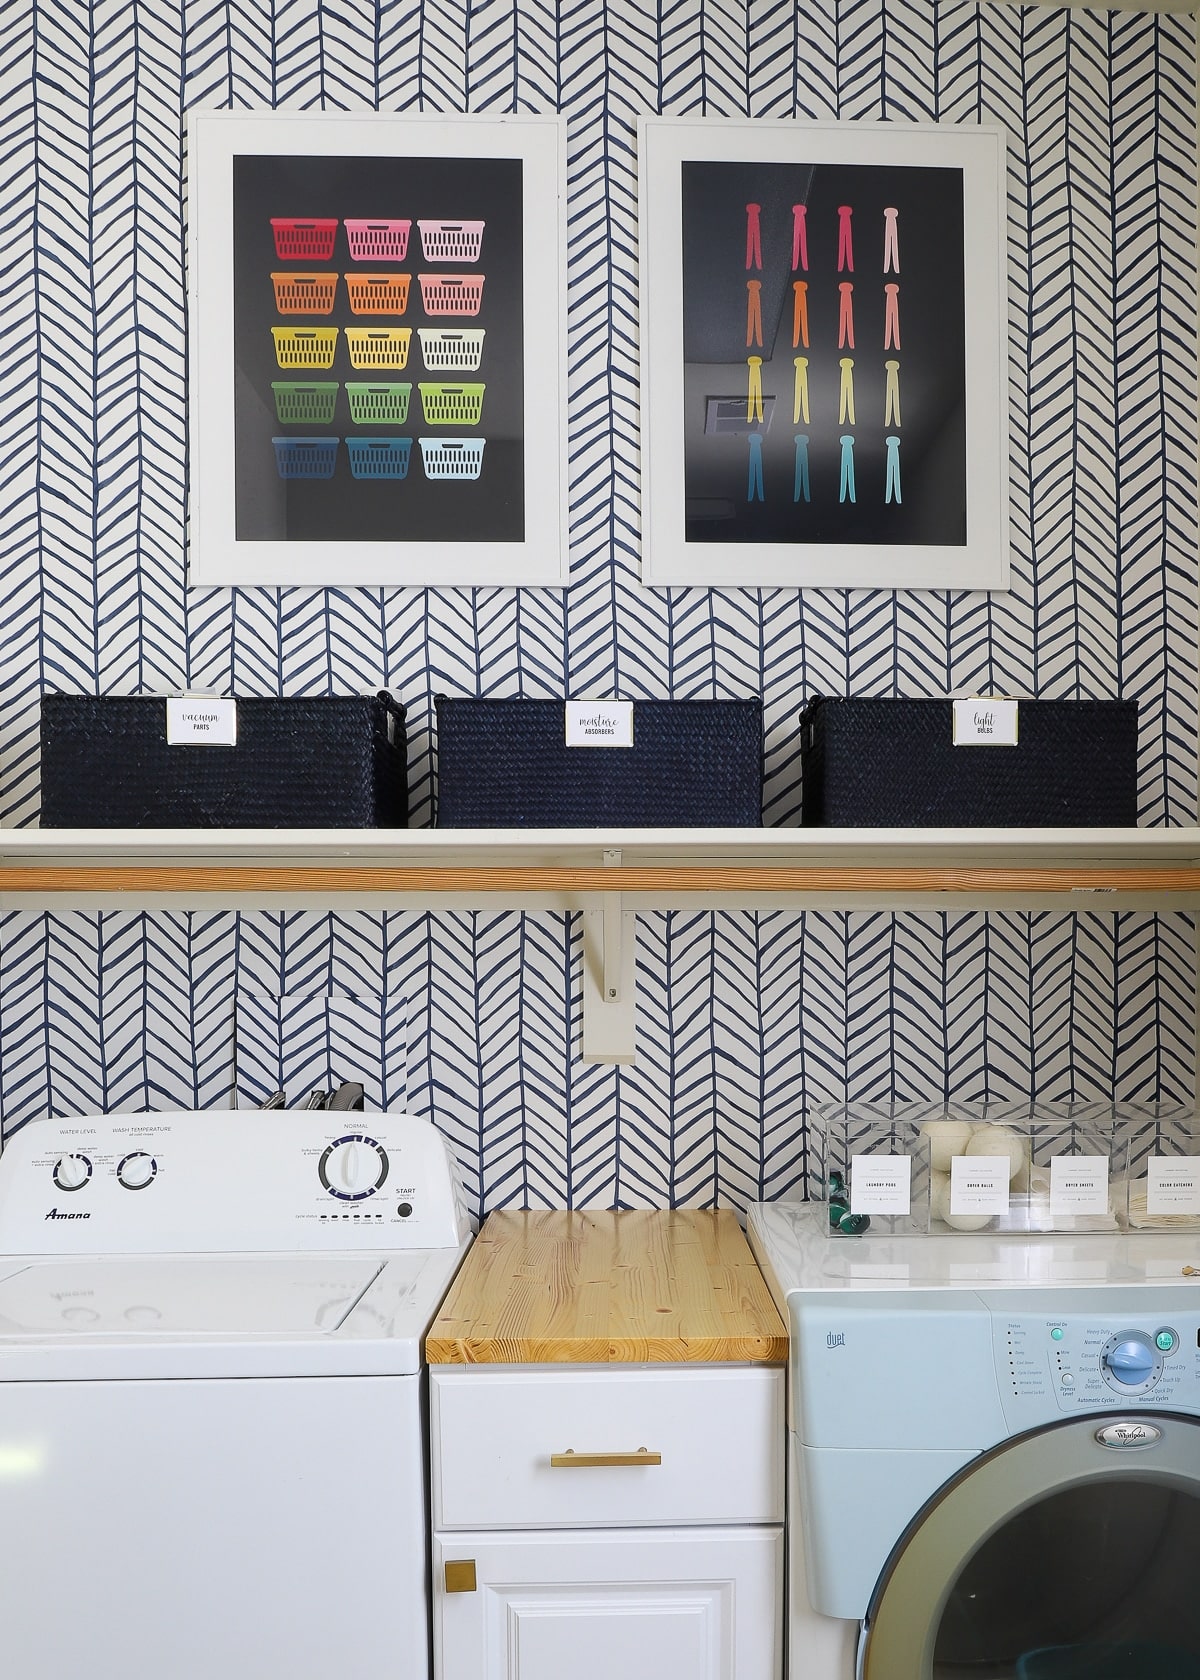 Laundry Room Organization and Printable Laundry Room Labels - The Idea Room